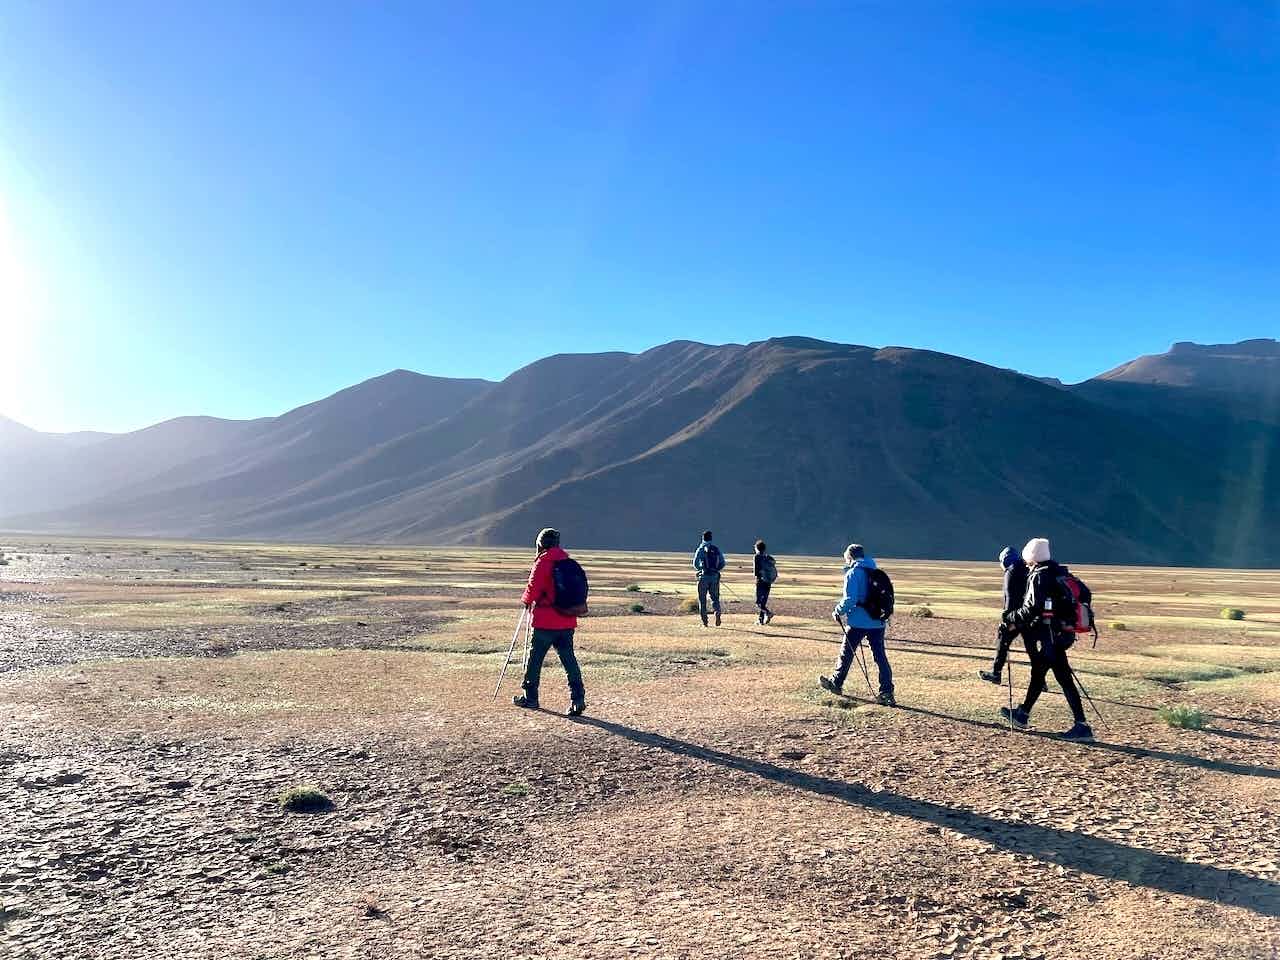 Hikers walking towards the sunlight with mountain views, Morocco.